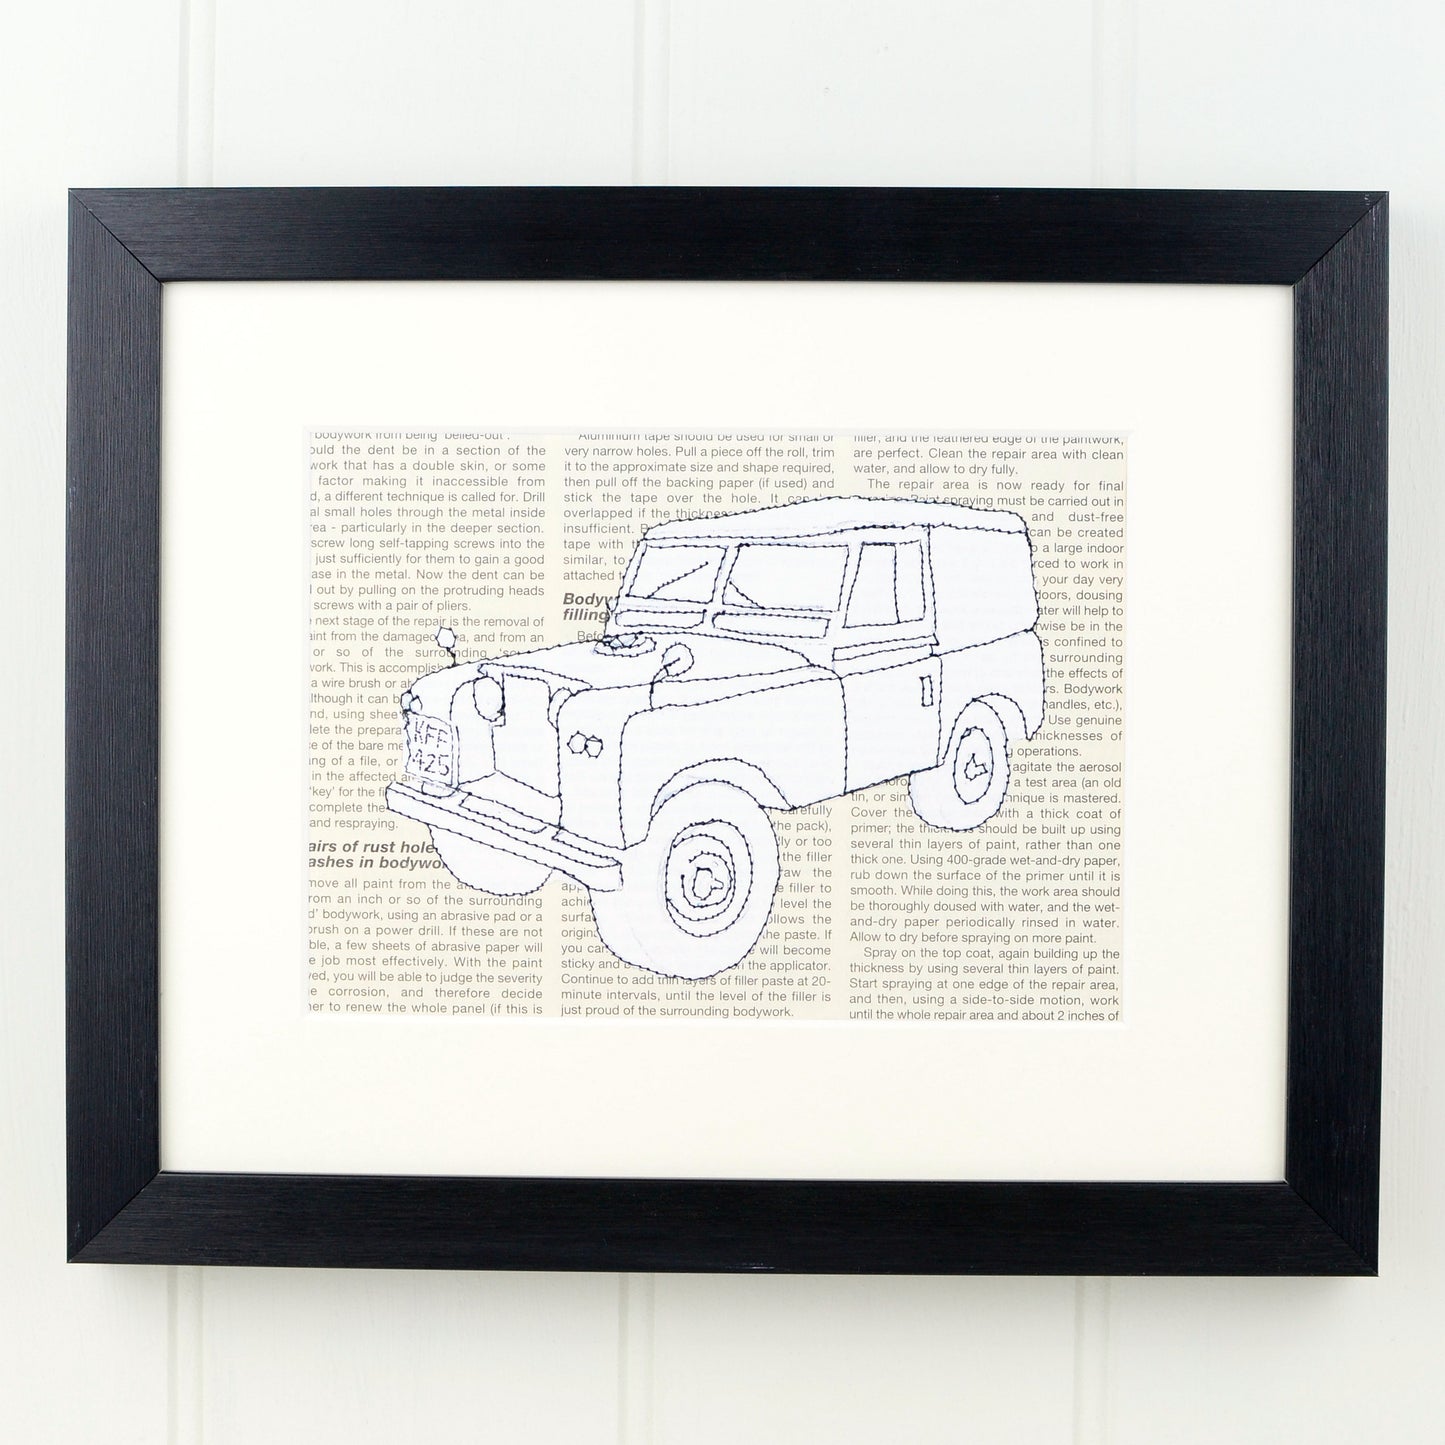 Personalised Landrover Embroidered Artwork - ZoeGibbons